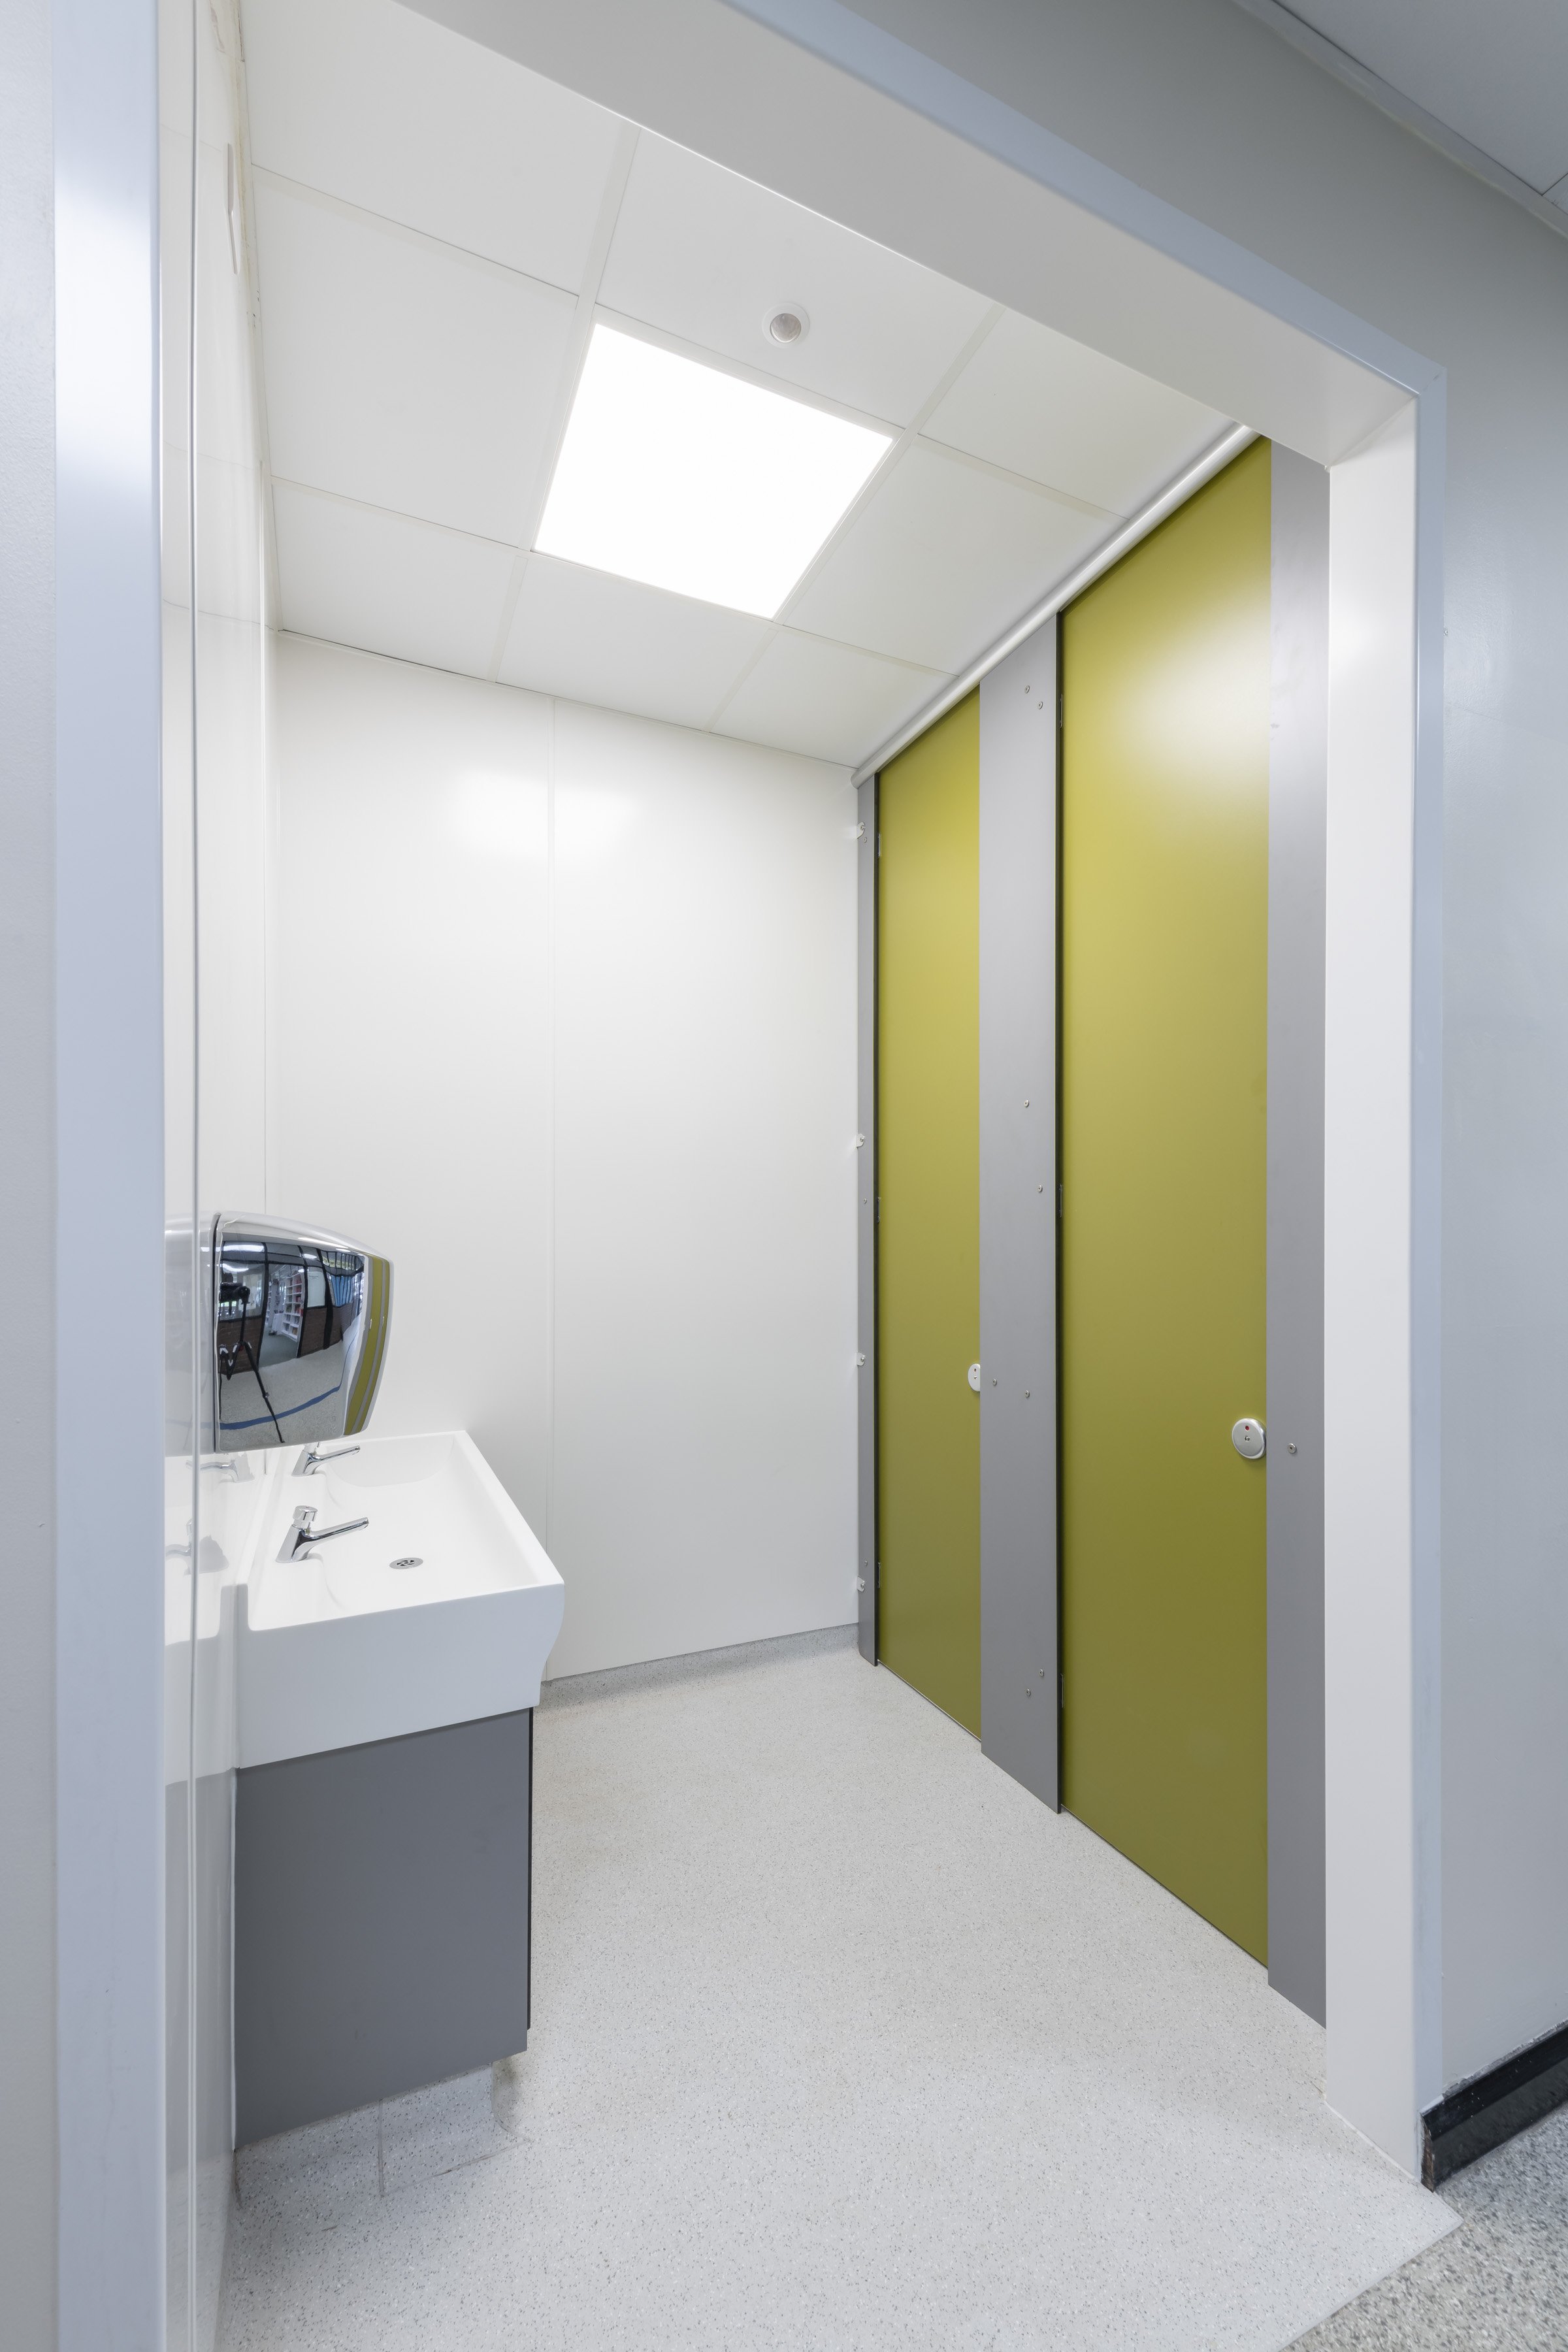 unisex washroom at stoke high with privacy cubicles in green.jpg